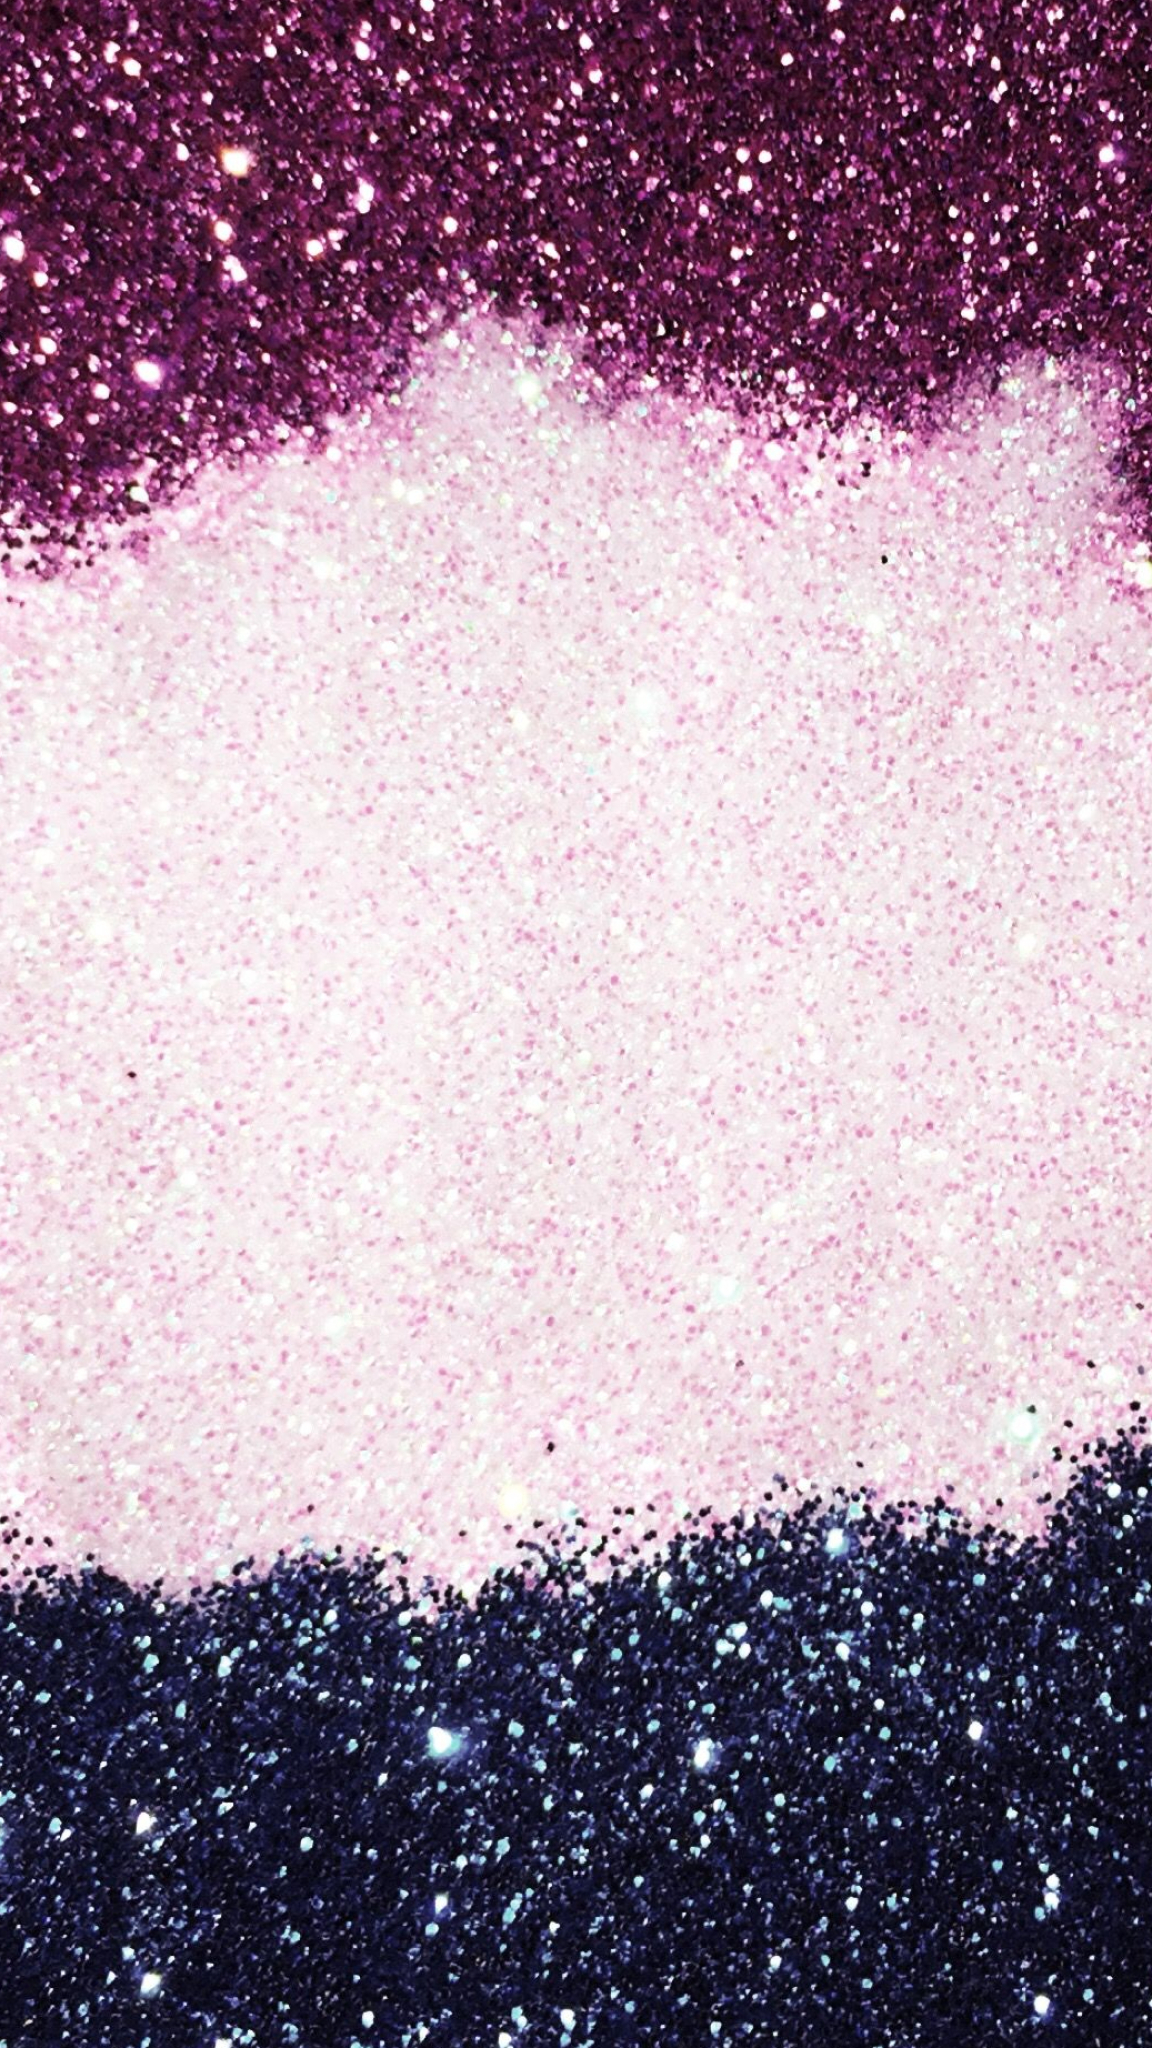 1152x2048 Glitter wallpaper Sparkle background sparkling glittery girly pretty colorful glitter | Iphone wallpaper glitter, Glitter phone wallpaper, Sparkles background